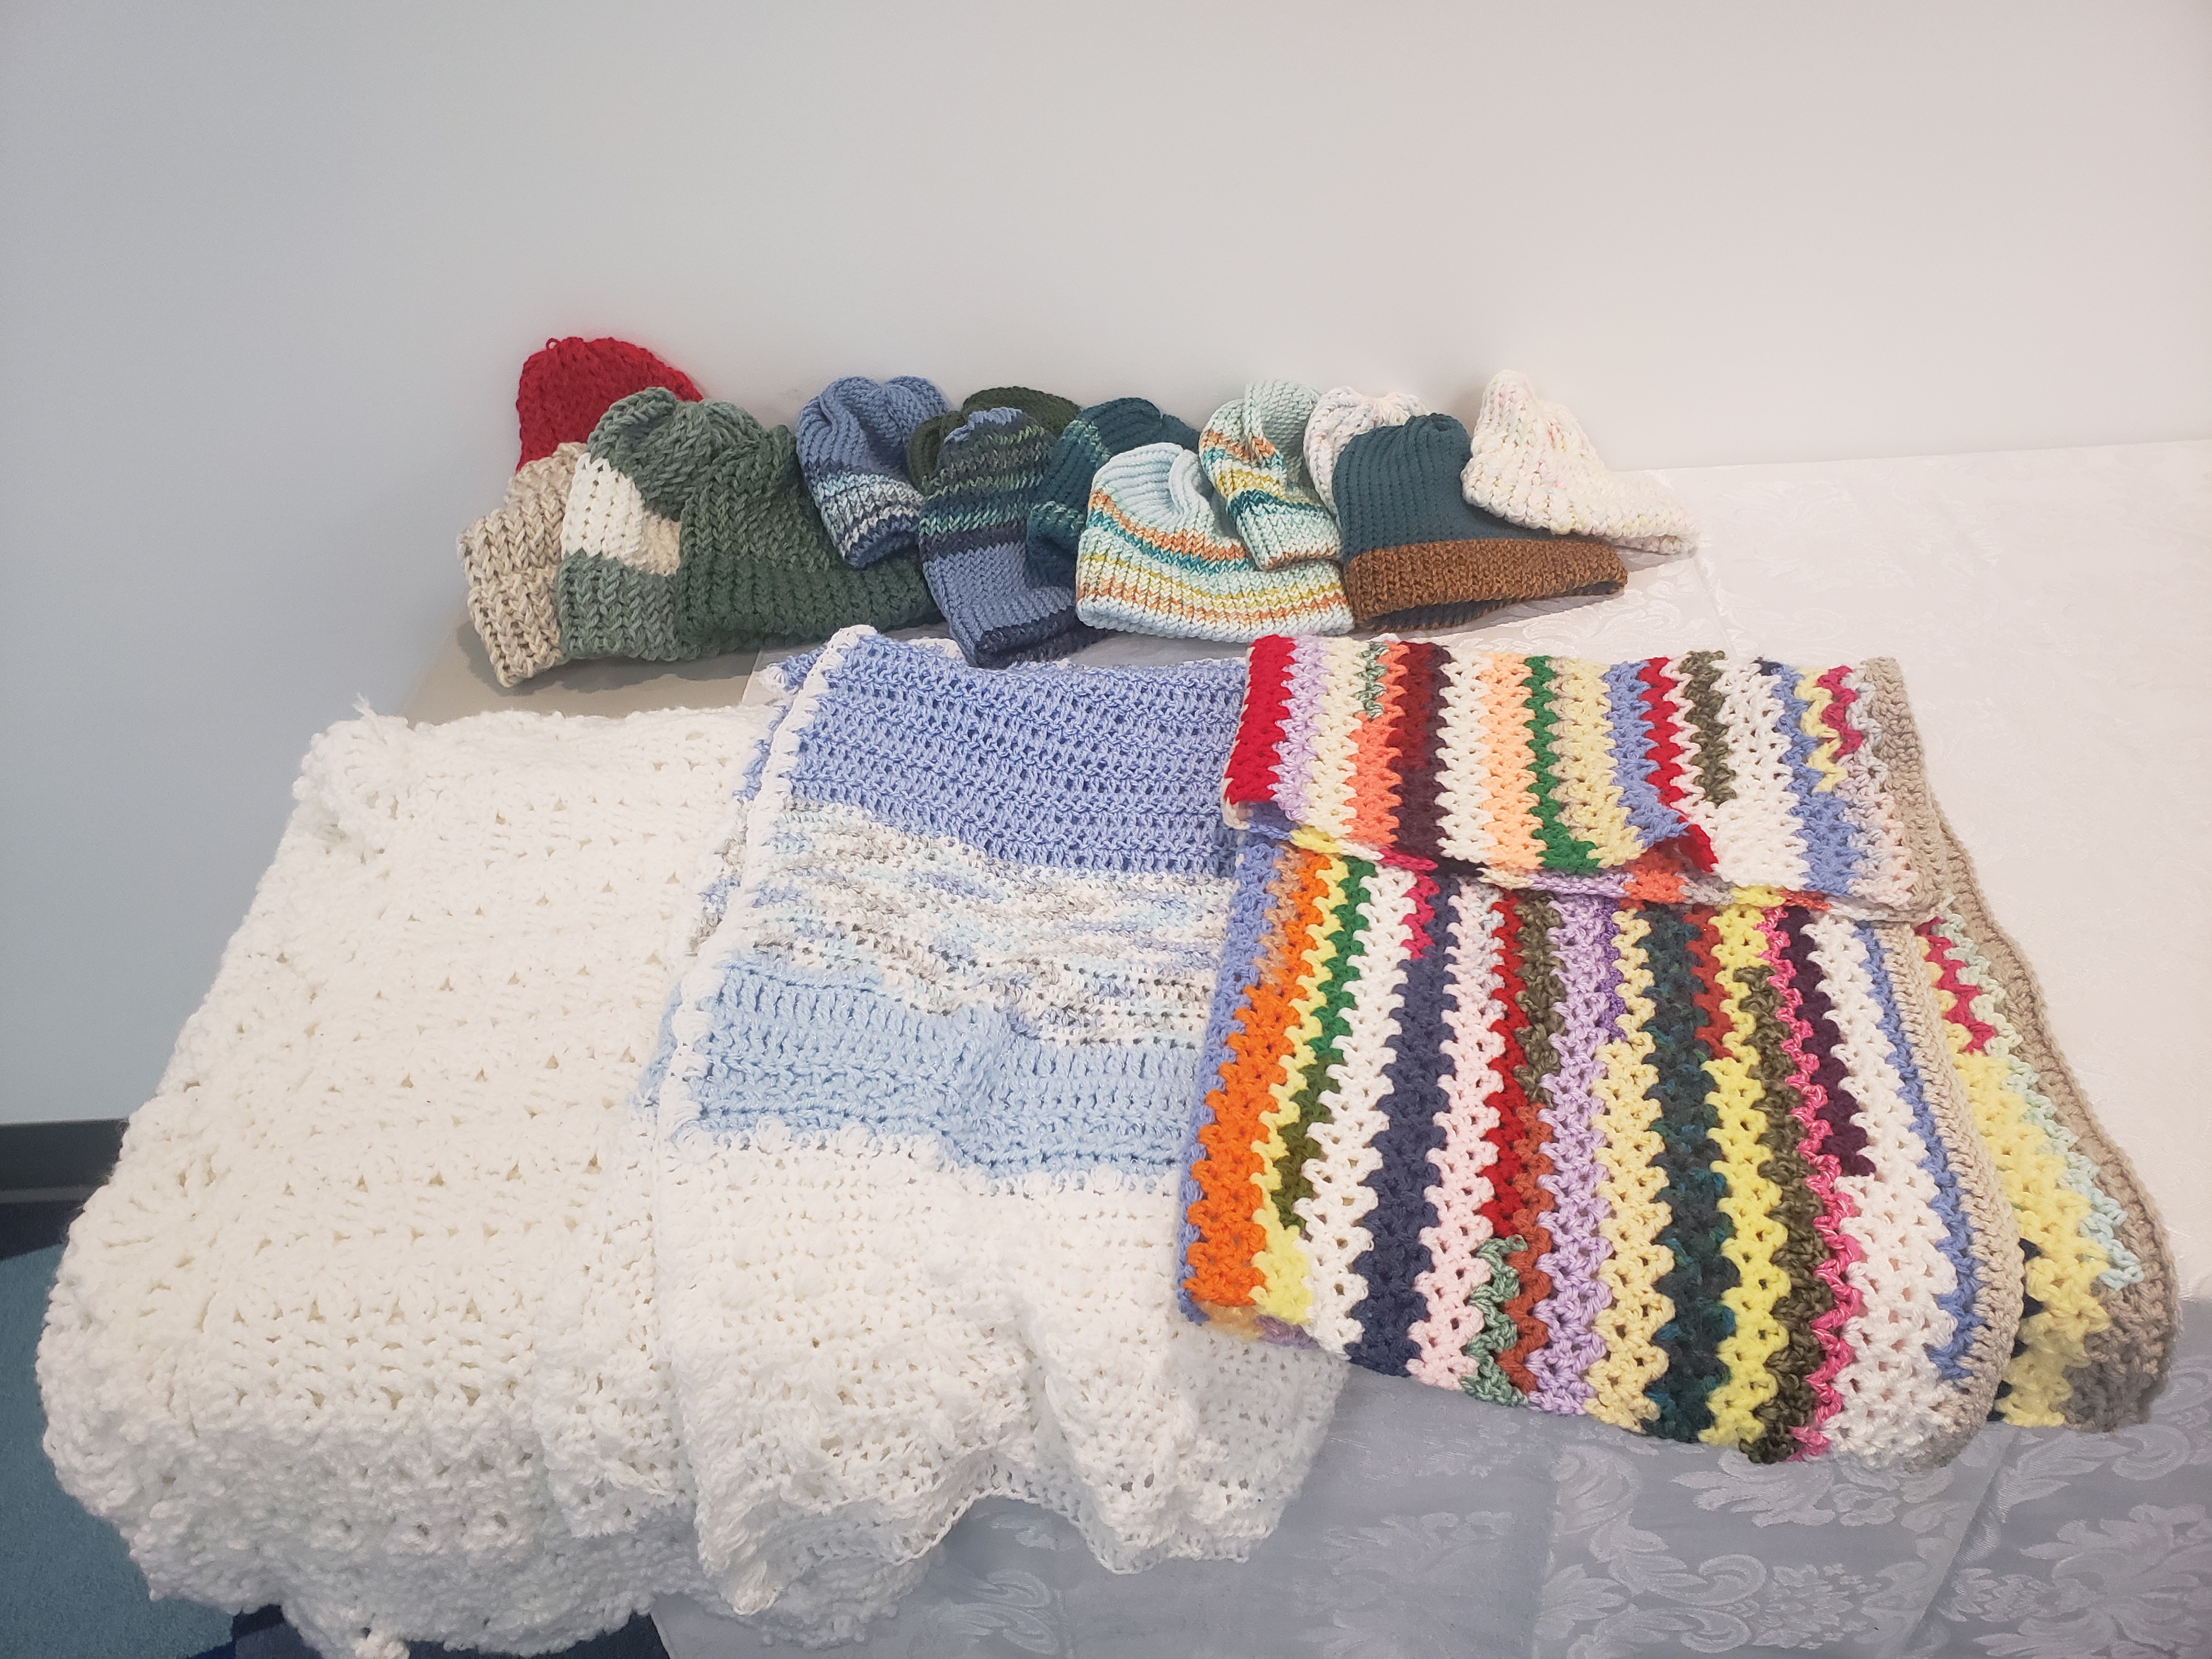 Crocheted and knitted hats and blankets